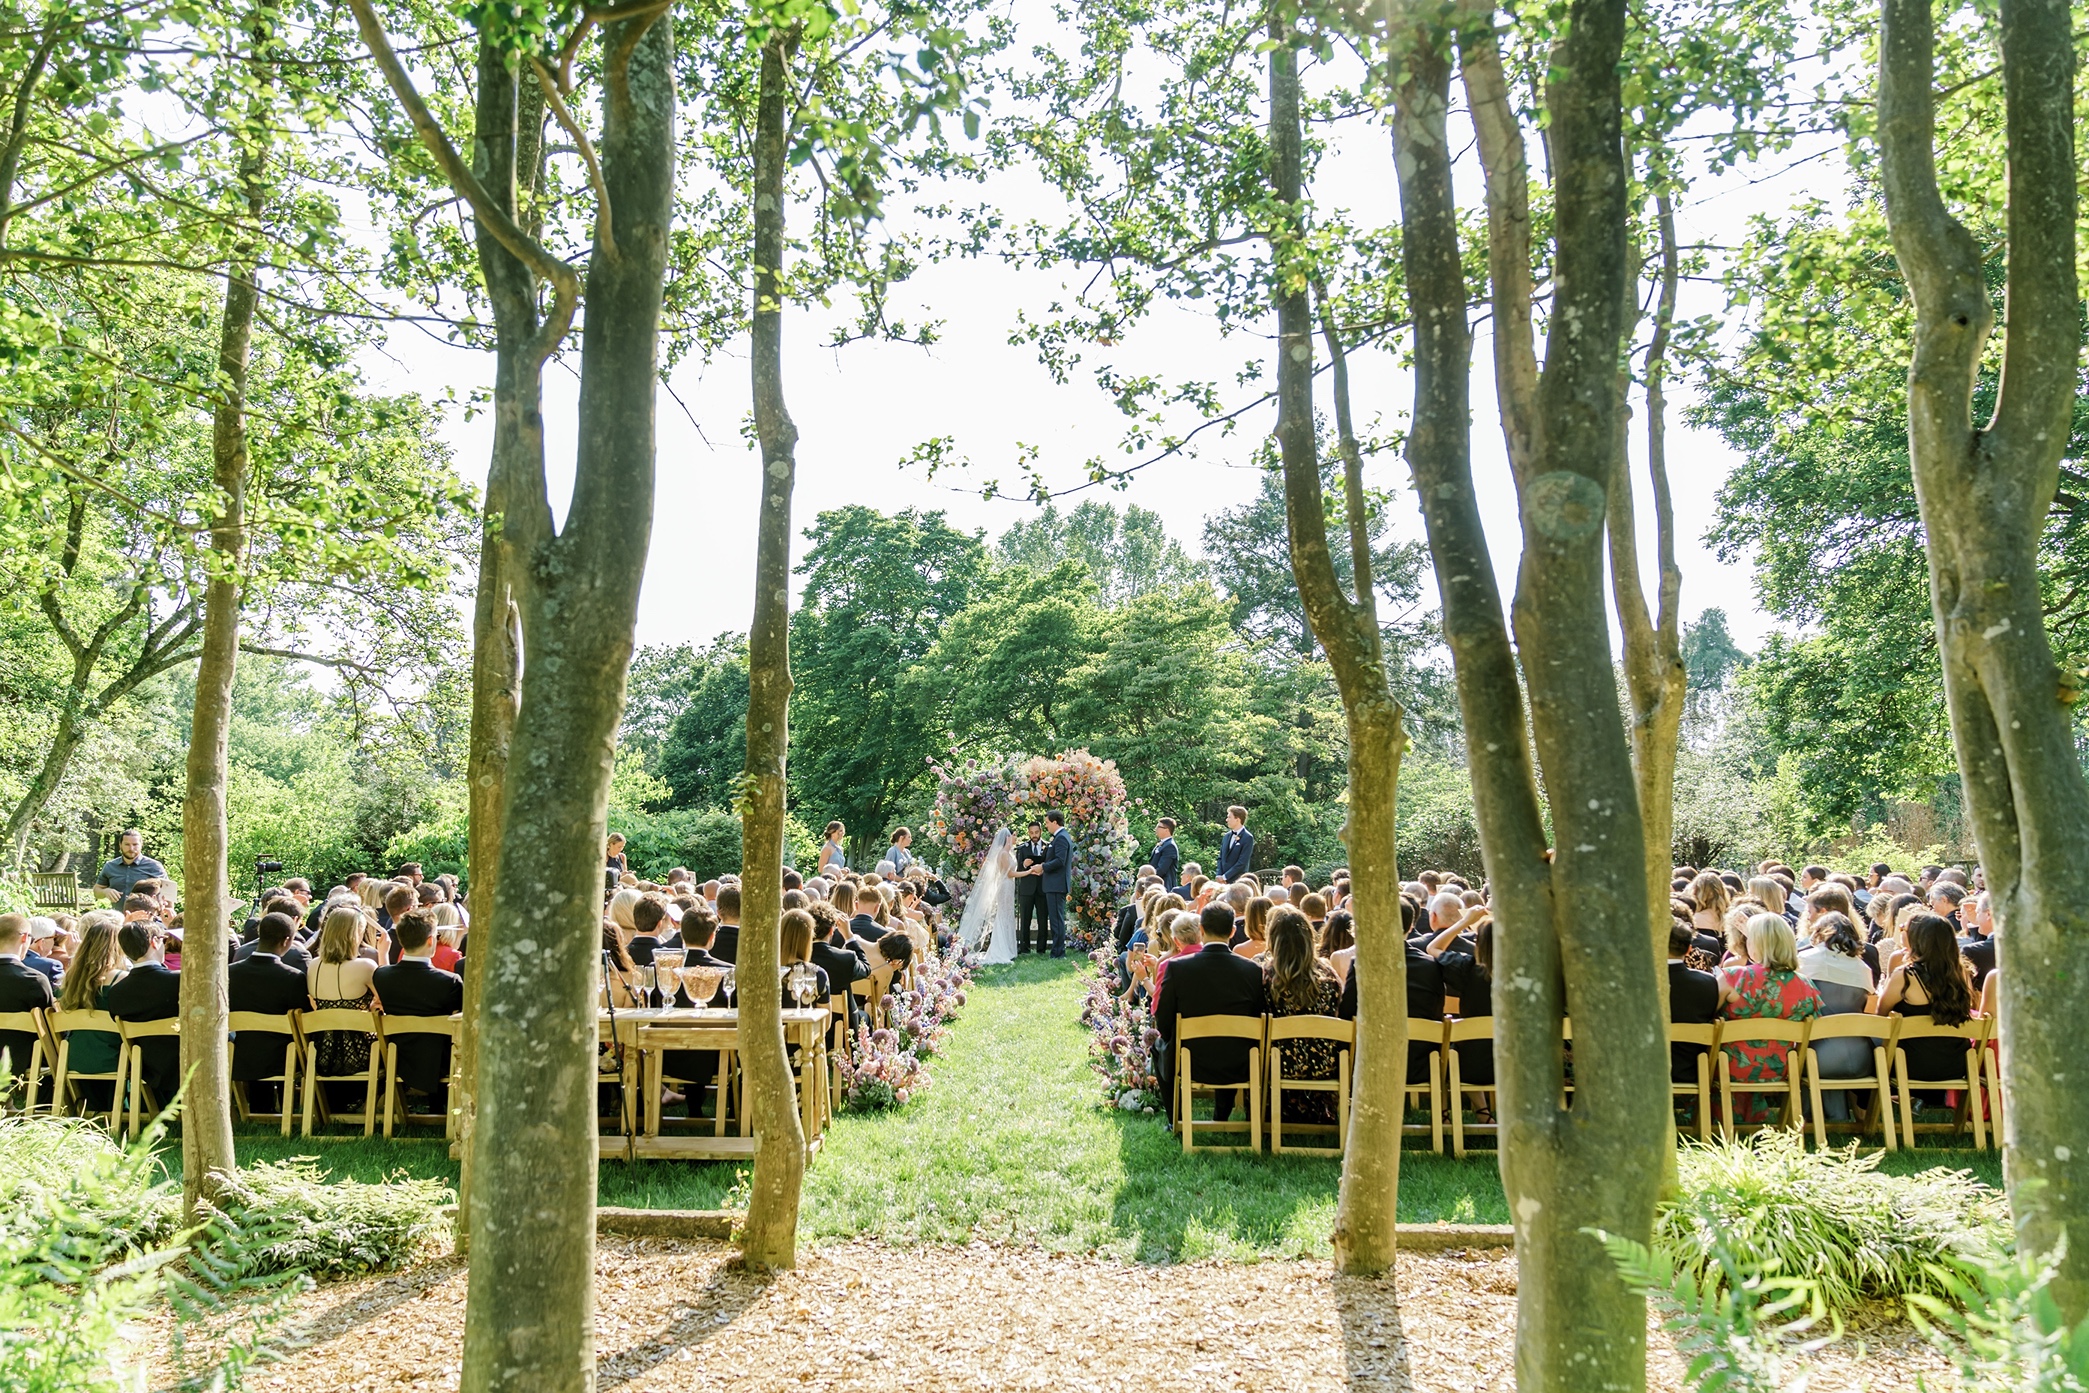 Wedding ceremony outdoors at Yew Dell Gardens